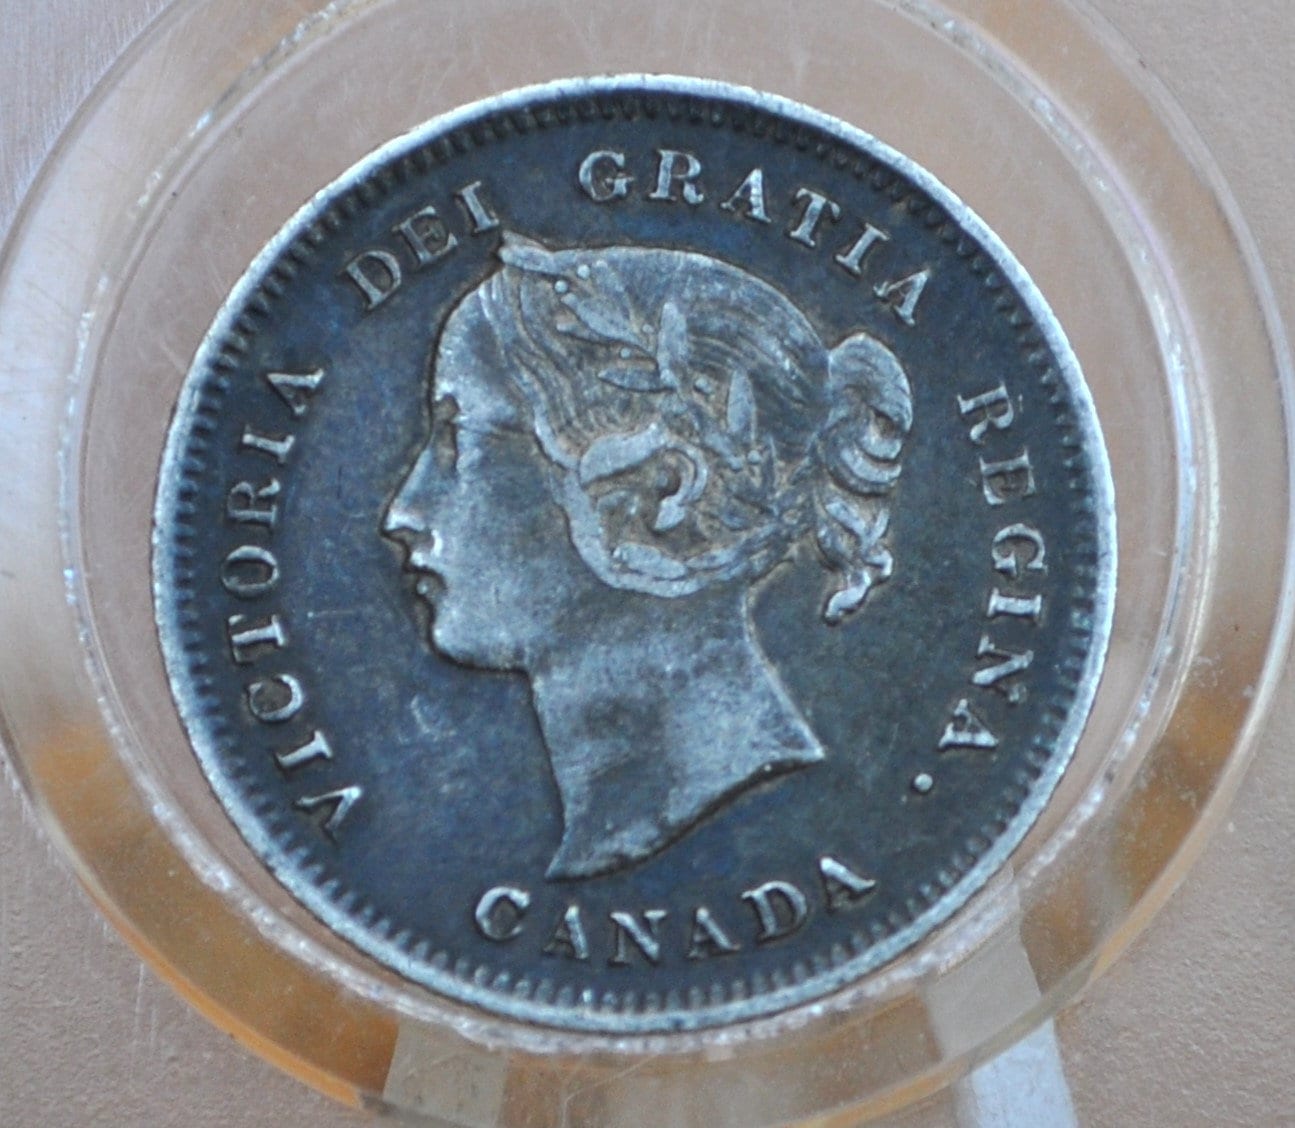 1900 Canadian Silver 5 Cent Coin - XF (Extremely Fine) - Queen Victoria - Canada 5 Cent Sterling Silver 1900 Canada - Lower Mintage